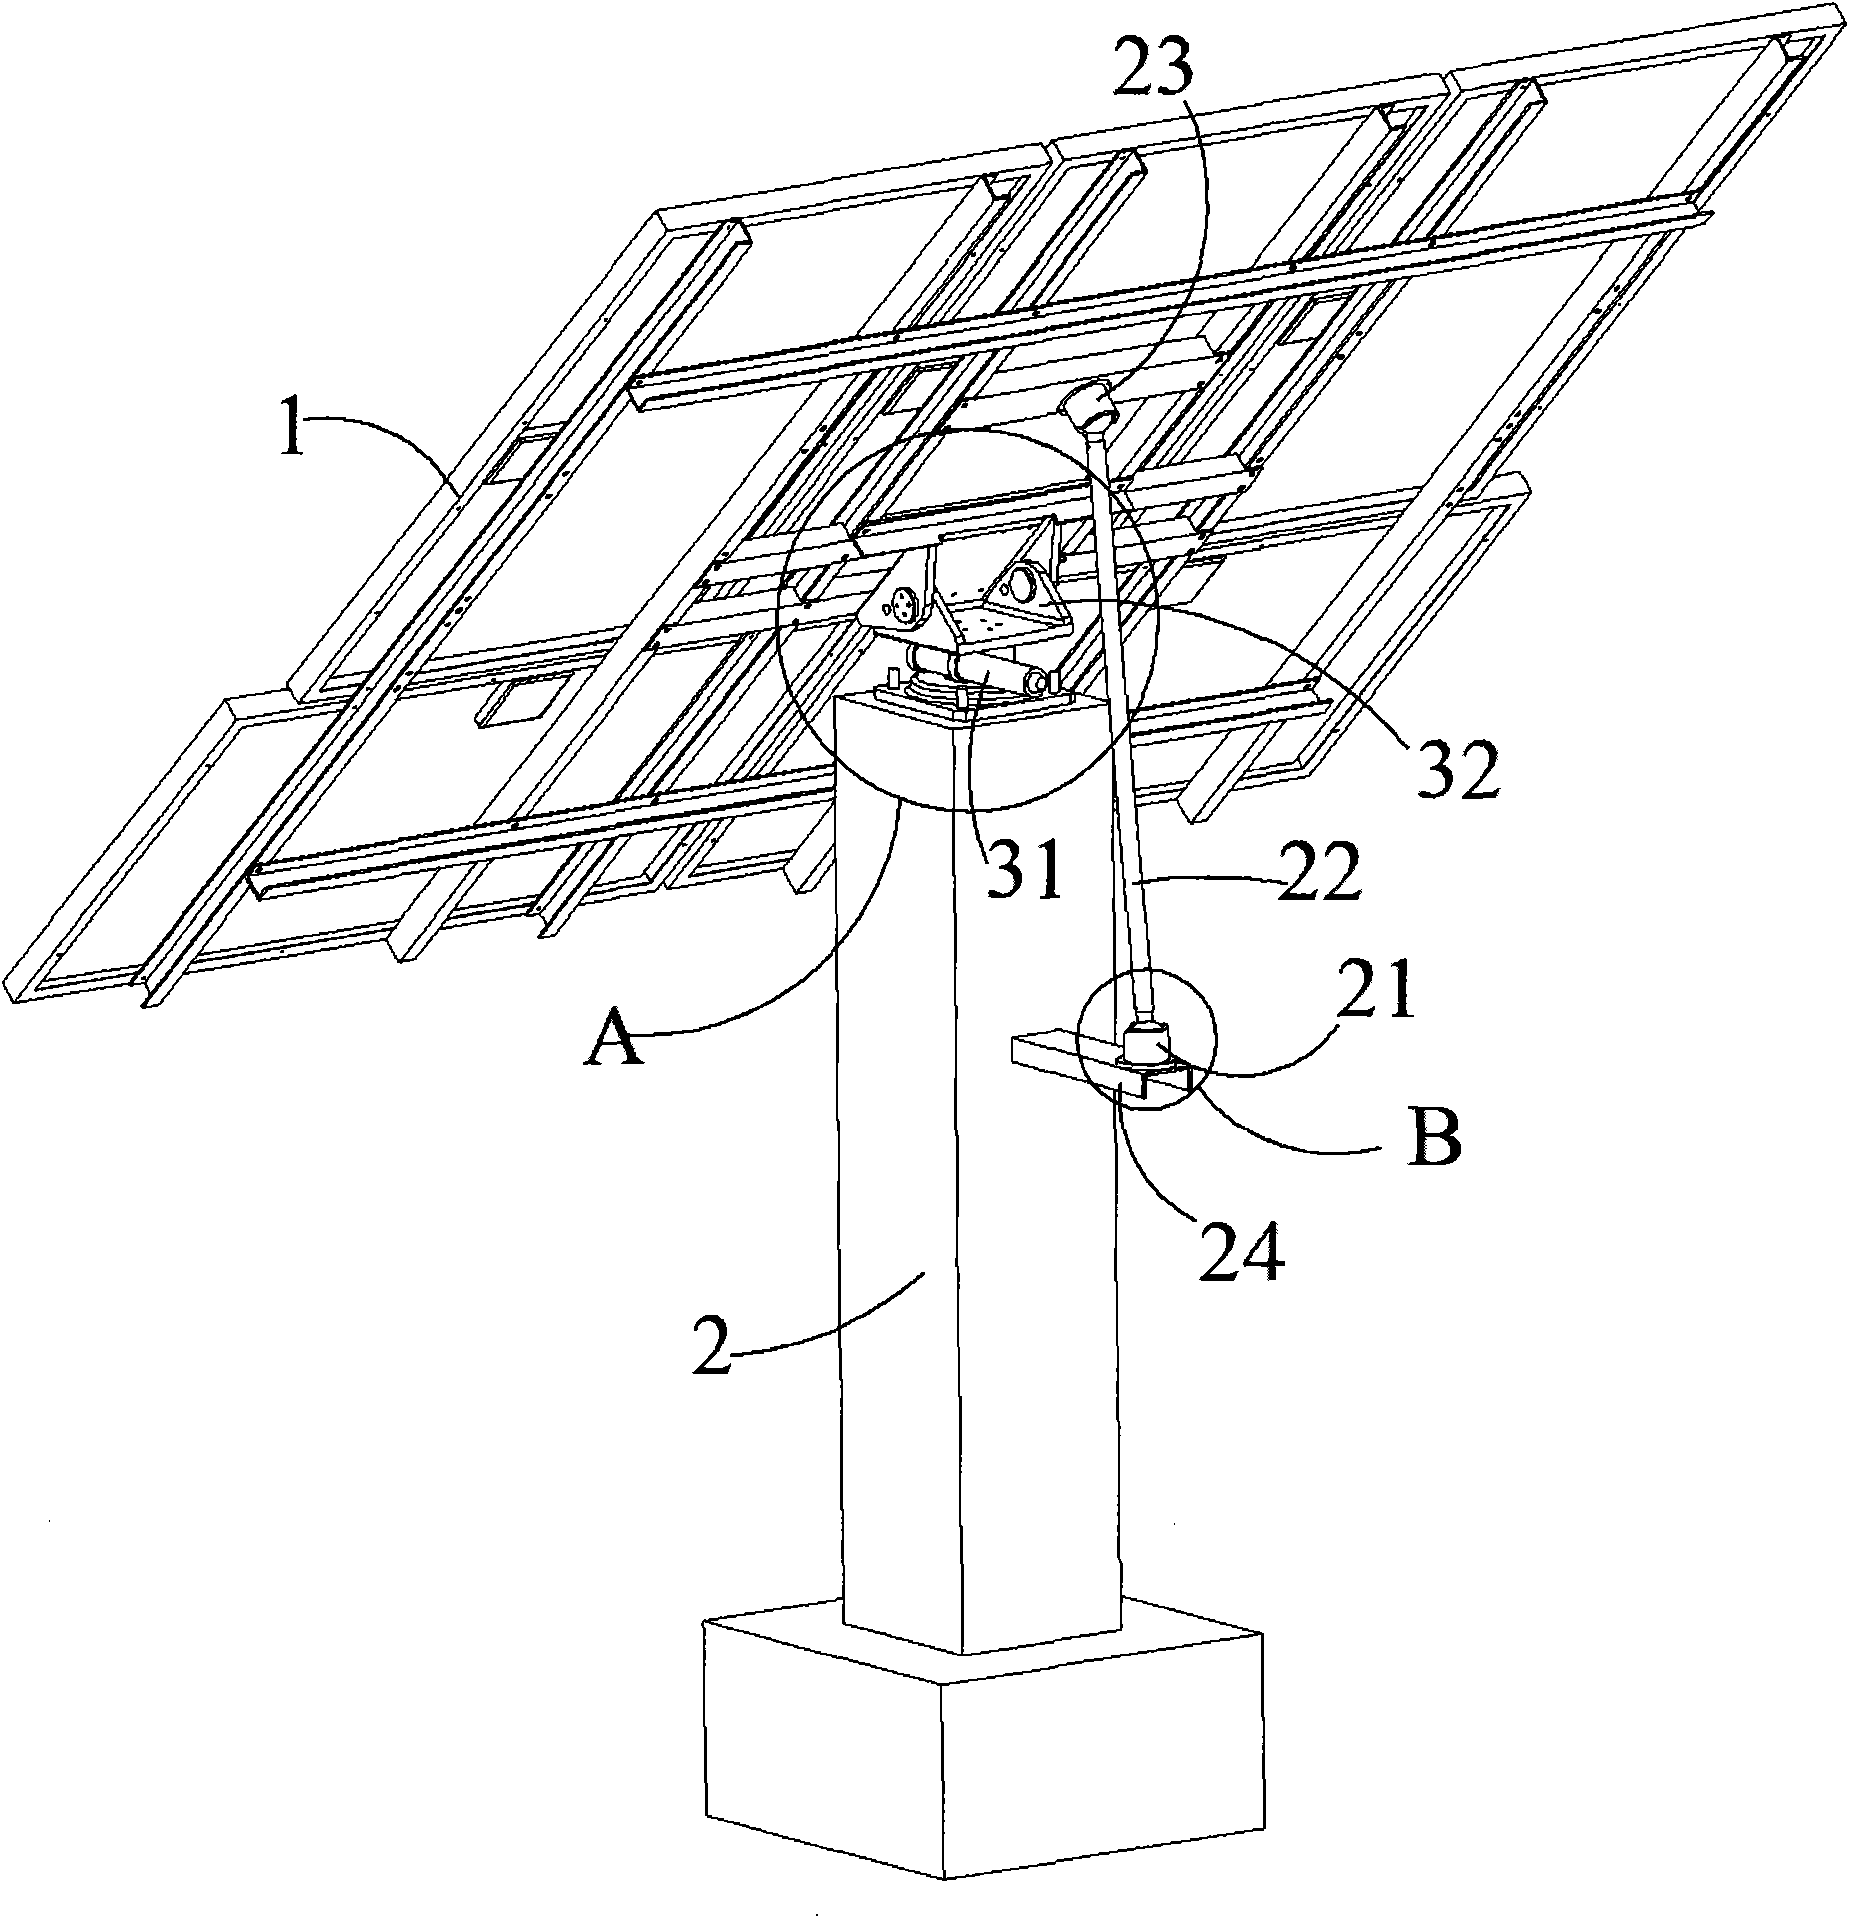 Photovoltaic power generation device with two-dimensional photovoltaic sun-positioning mechanism